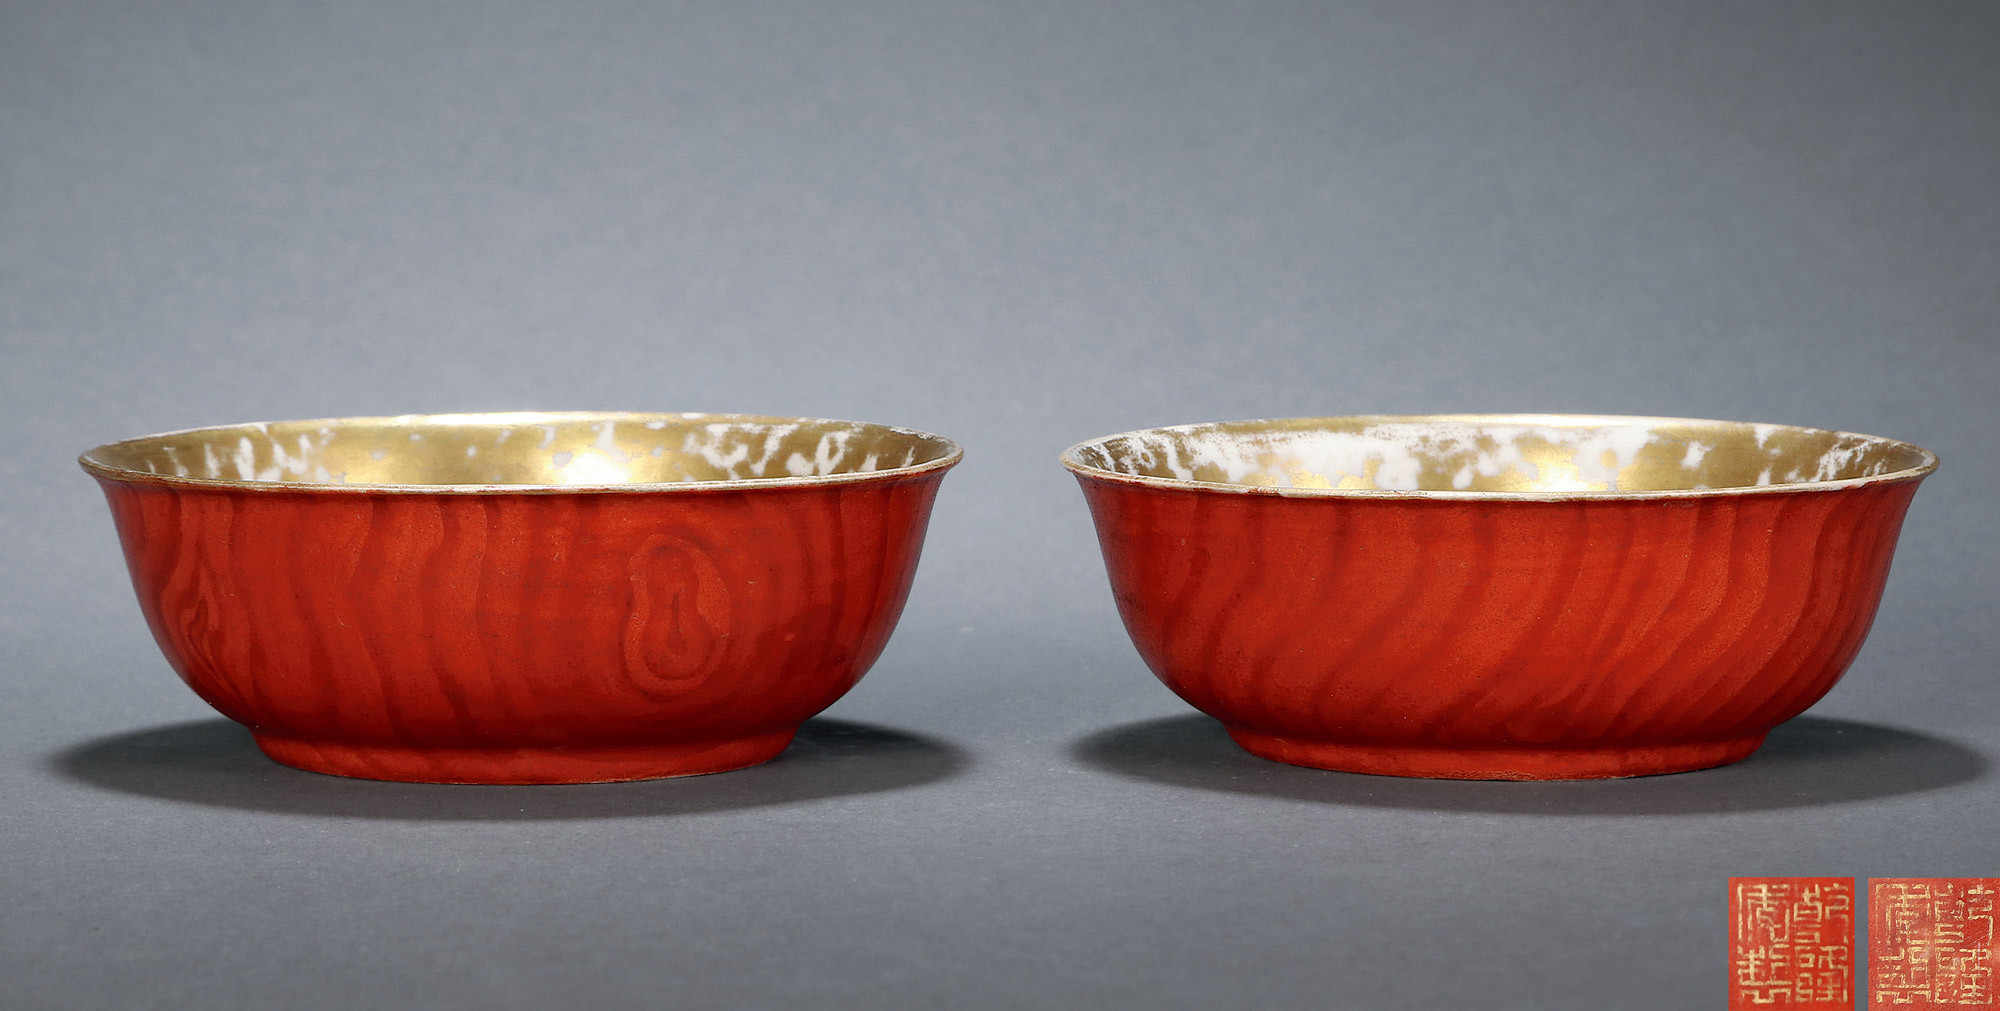 A PAIR OF IMITATED GLAZED GILTED BOWLS